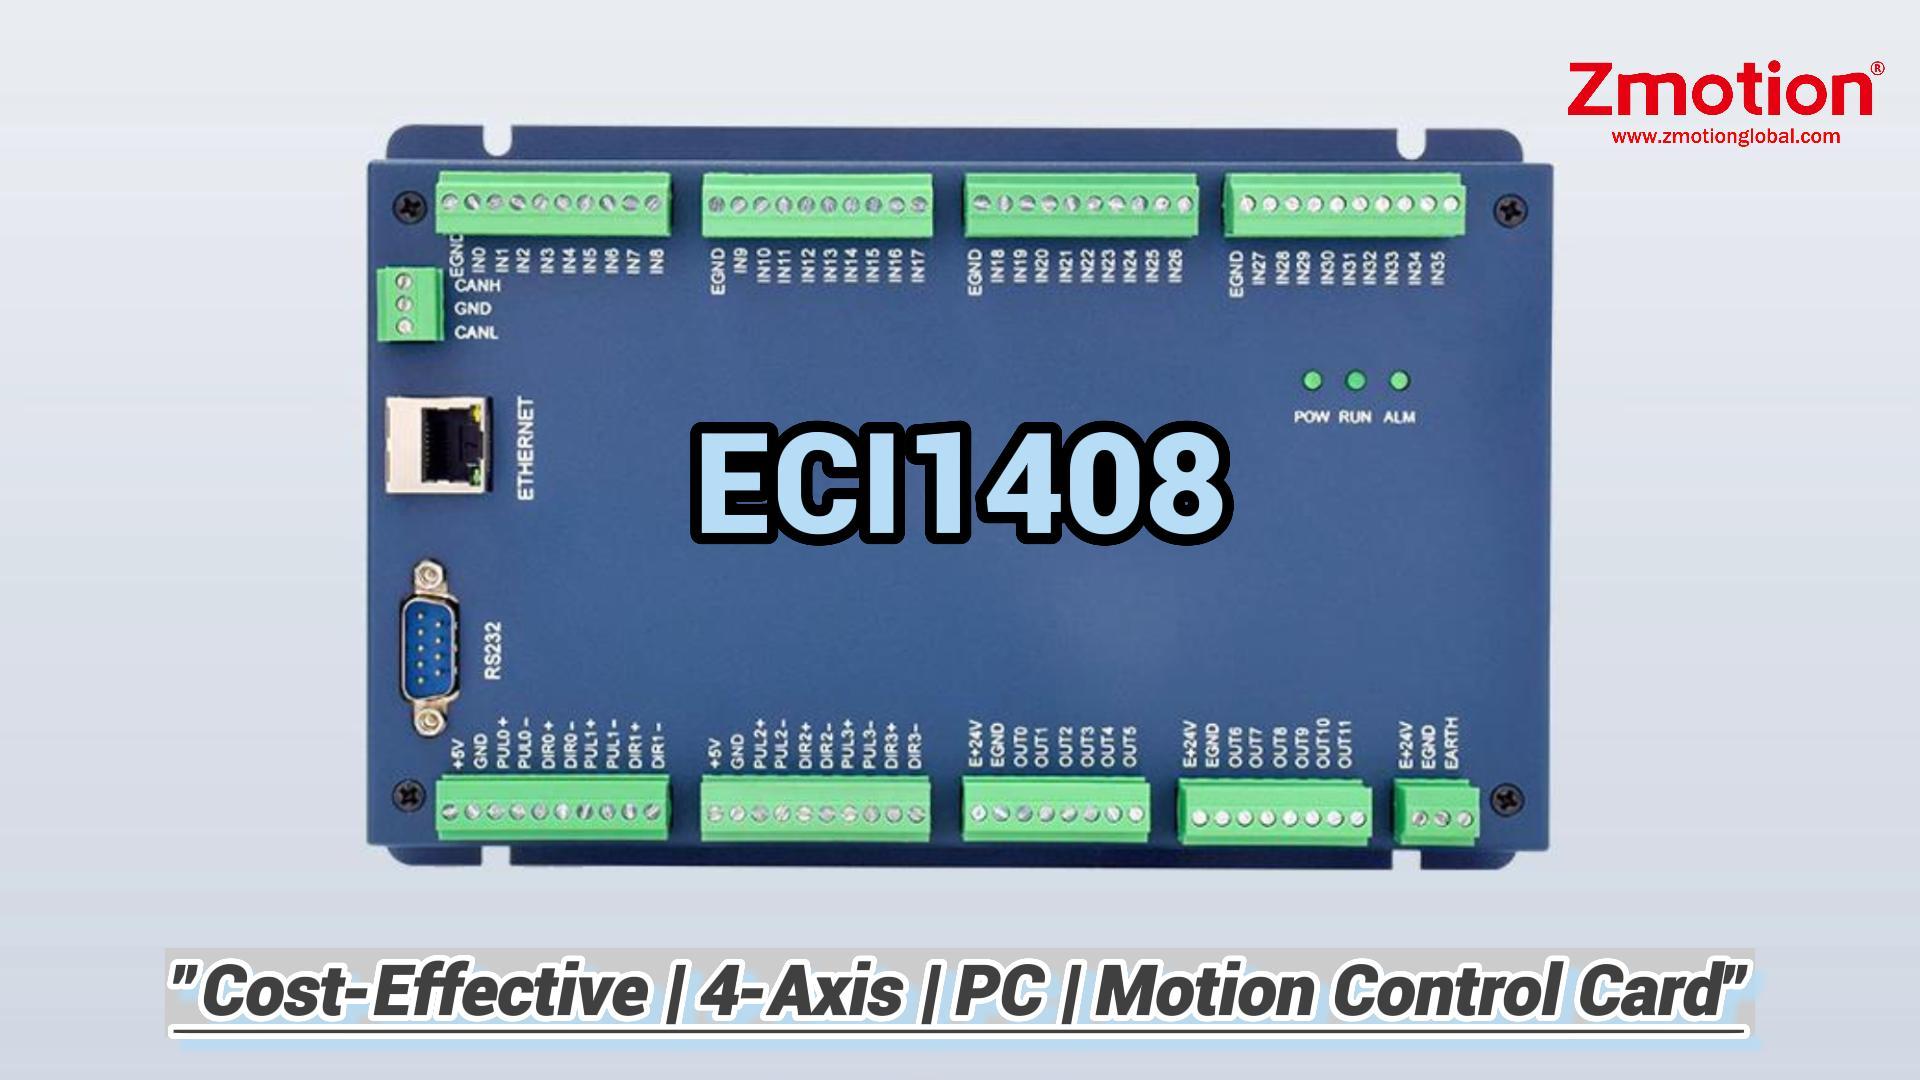 One Cost-Effective 4-Axis PC Motion Control Ca...